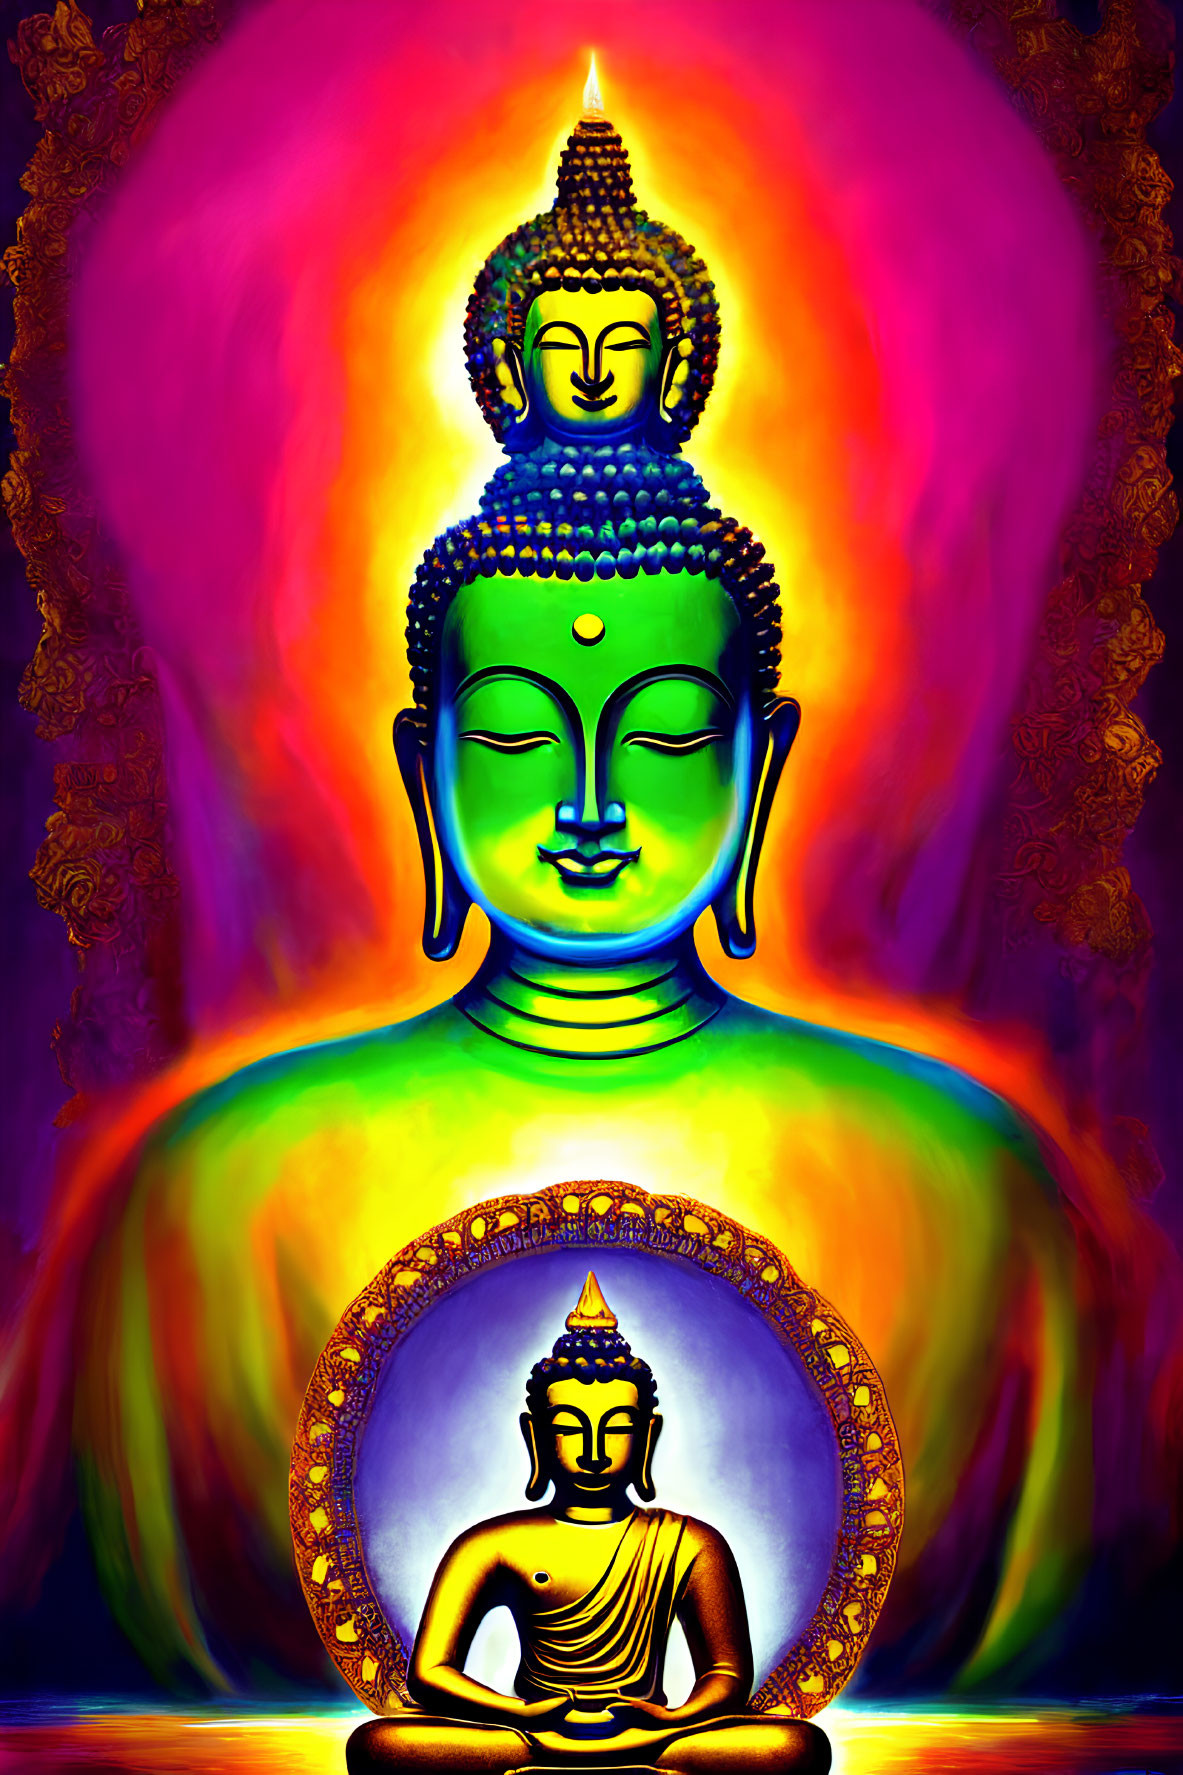 Colorful Buddha Figures in Traditional Pose